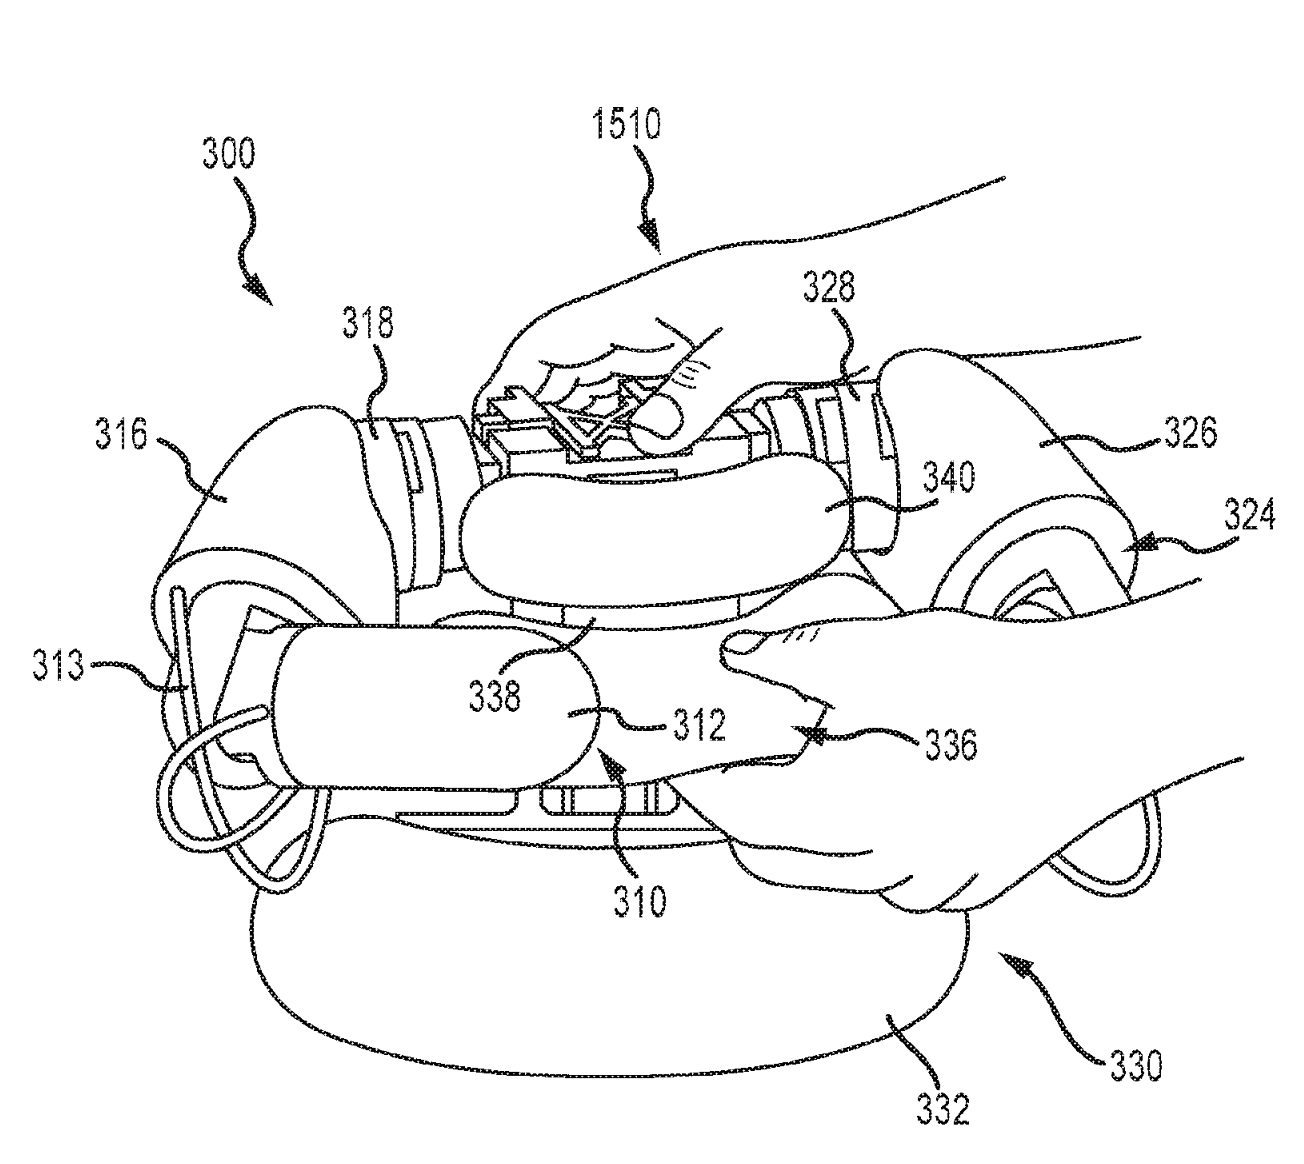 Disney files patent for “huggable and interactive” humanoid robots ...